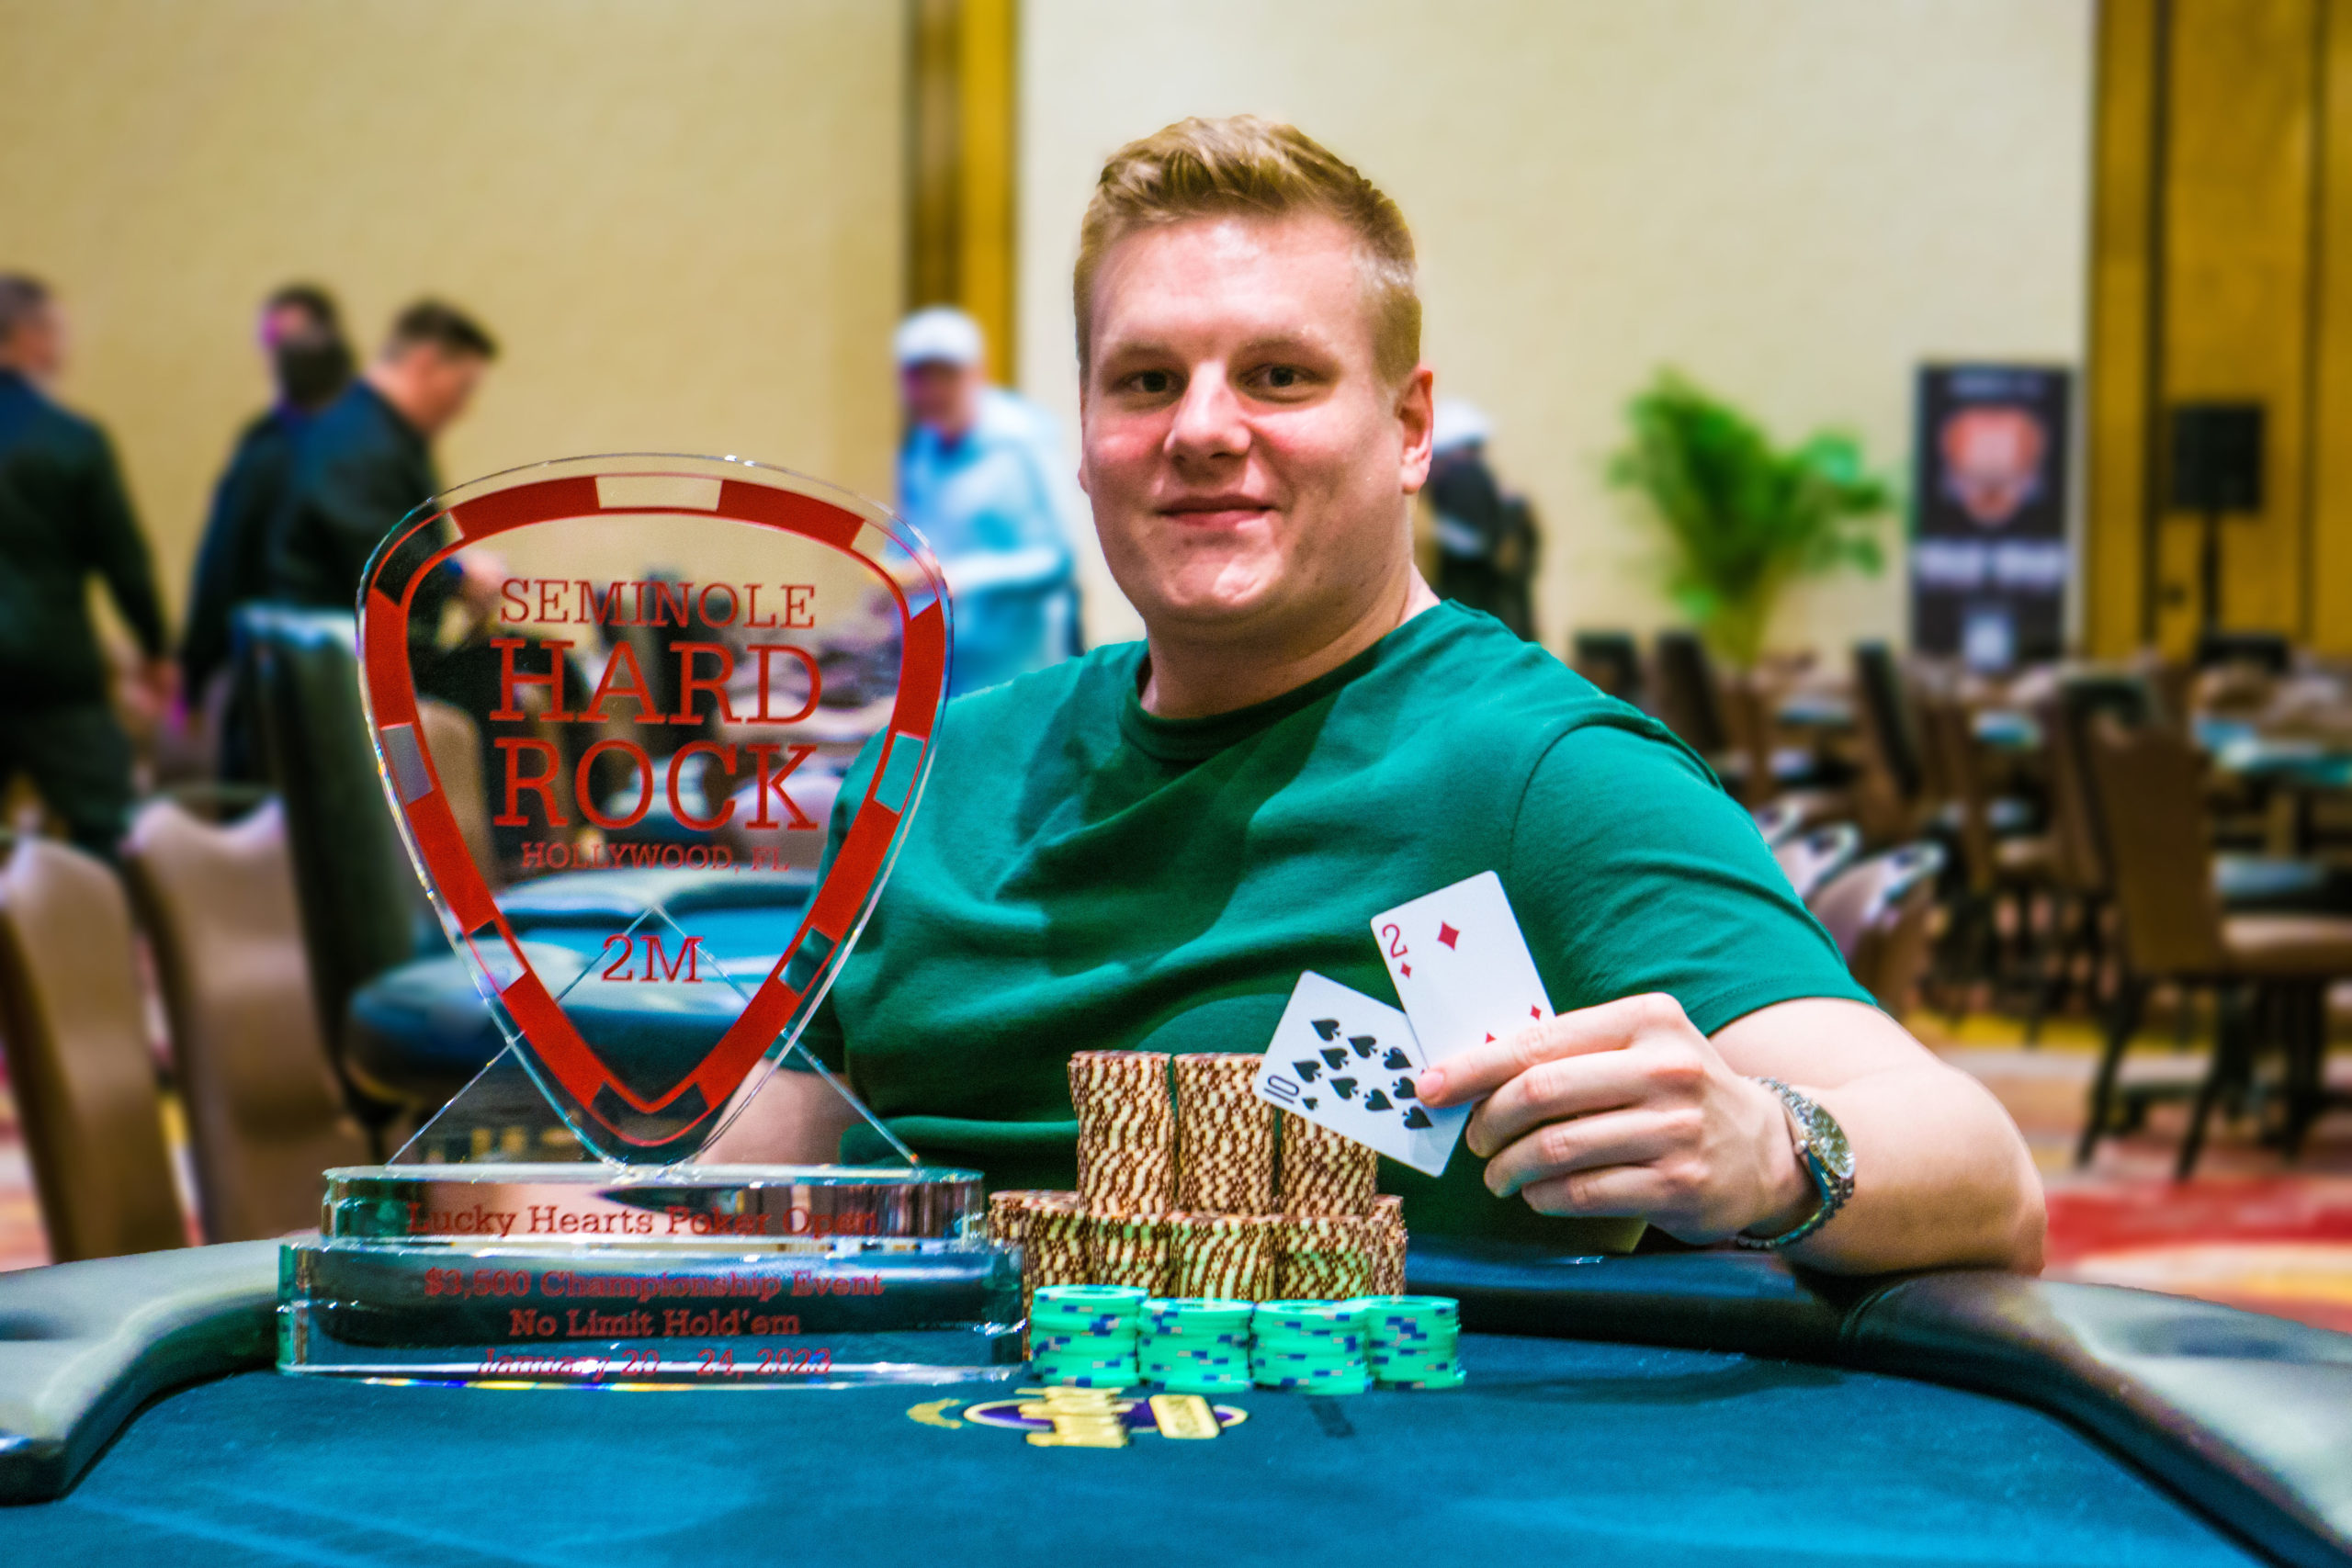 Lucky Hearts Poker Open Champion Marius Gierse poses with a pile of chips, the Championship trophy, and he's holding two cards -- 10-2 offsuit.